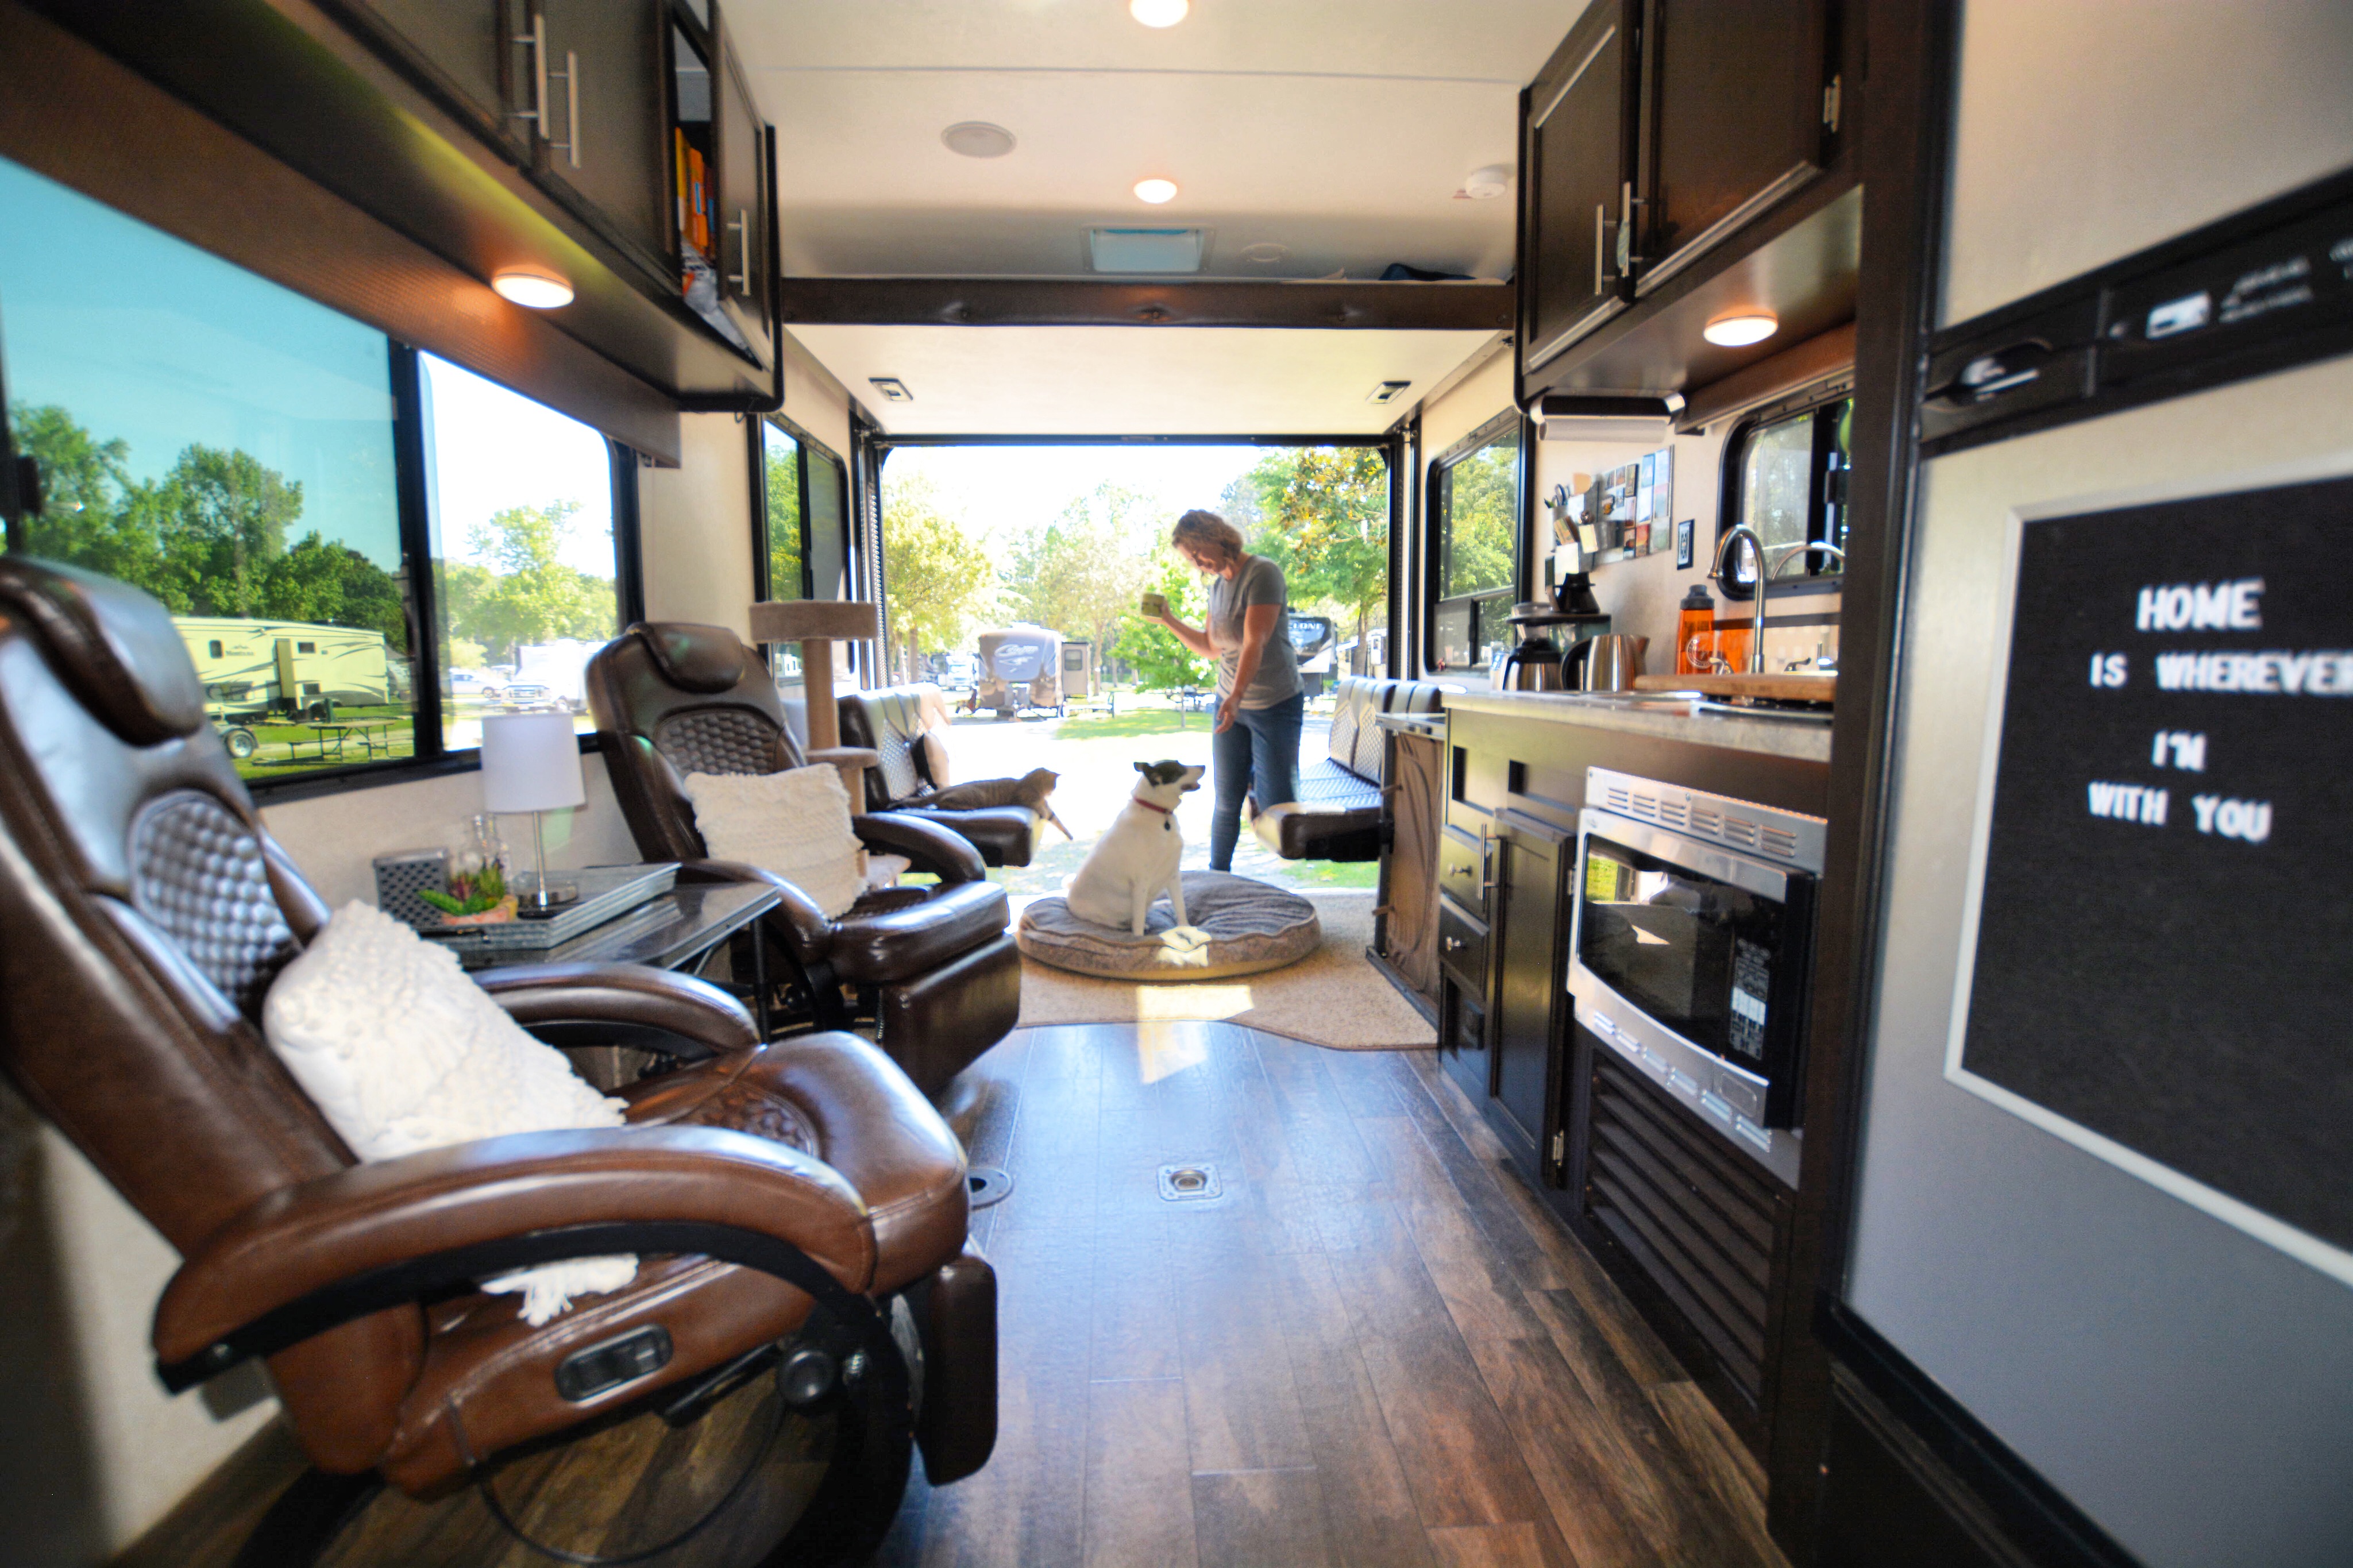 8 Tips for RVing Safely in the Age of Coronavirus